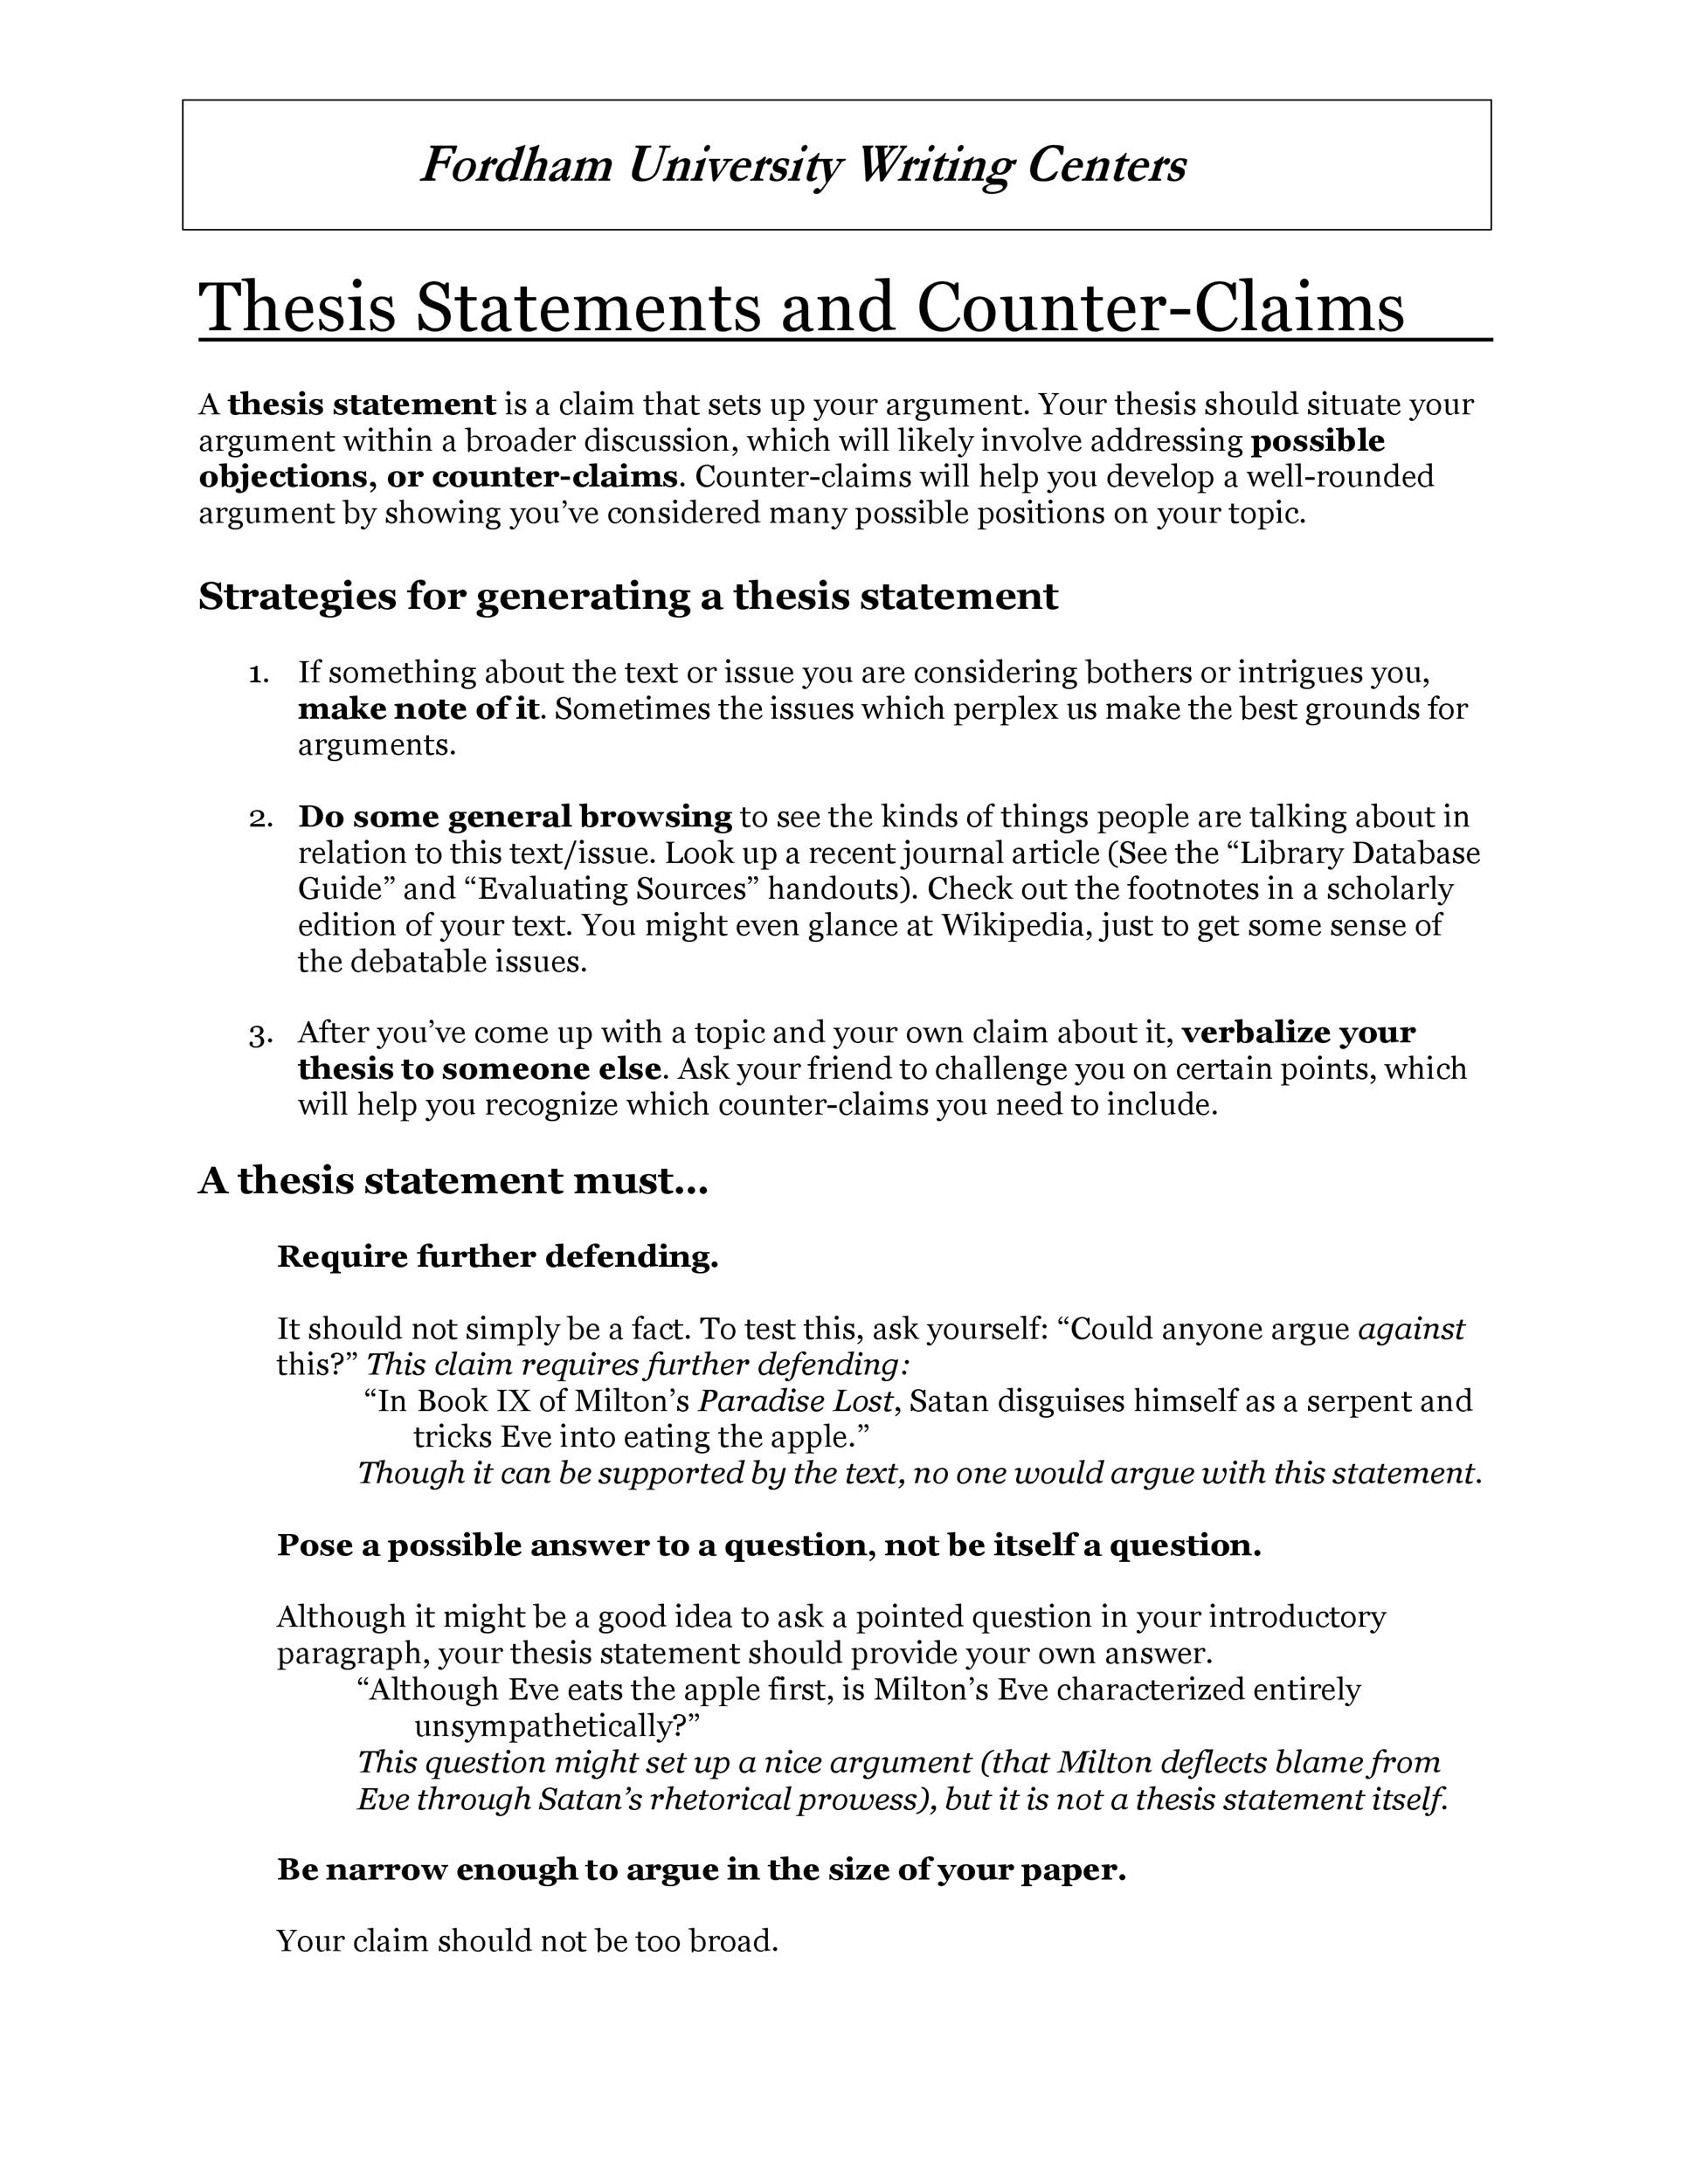 how to write thesis statement for advantages and disadvantages essay